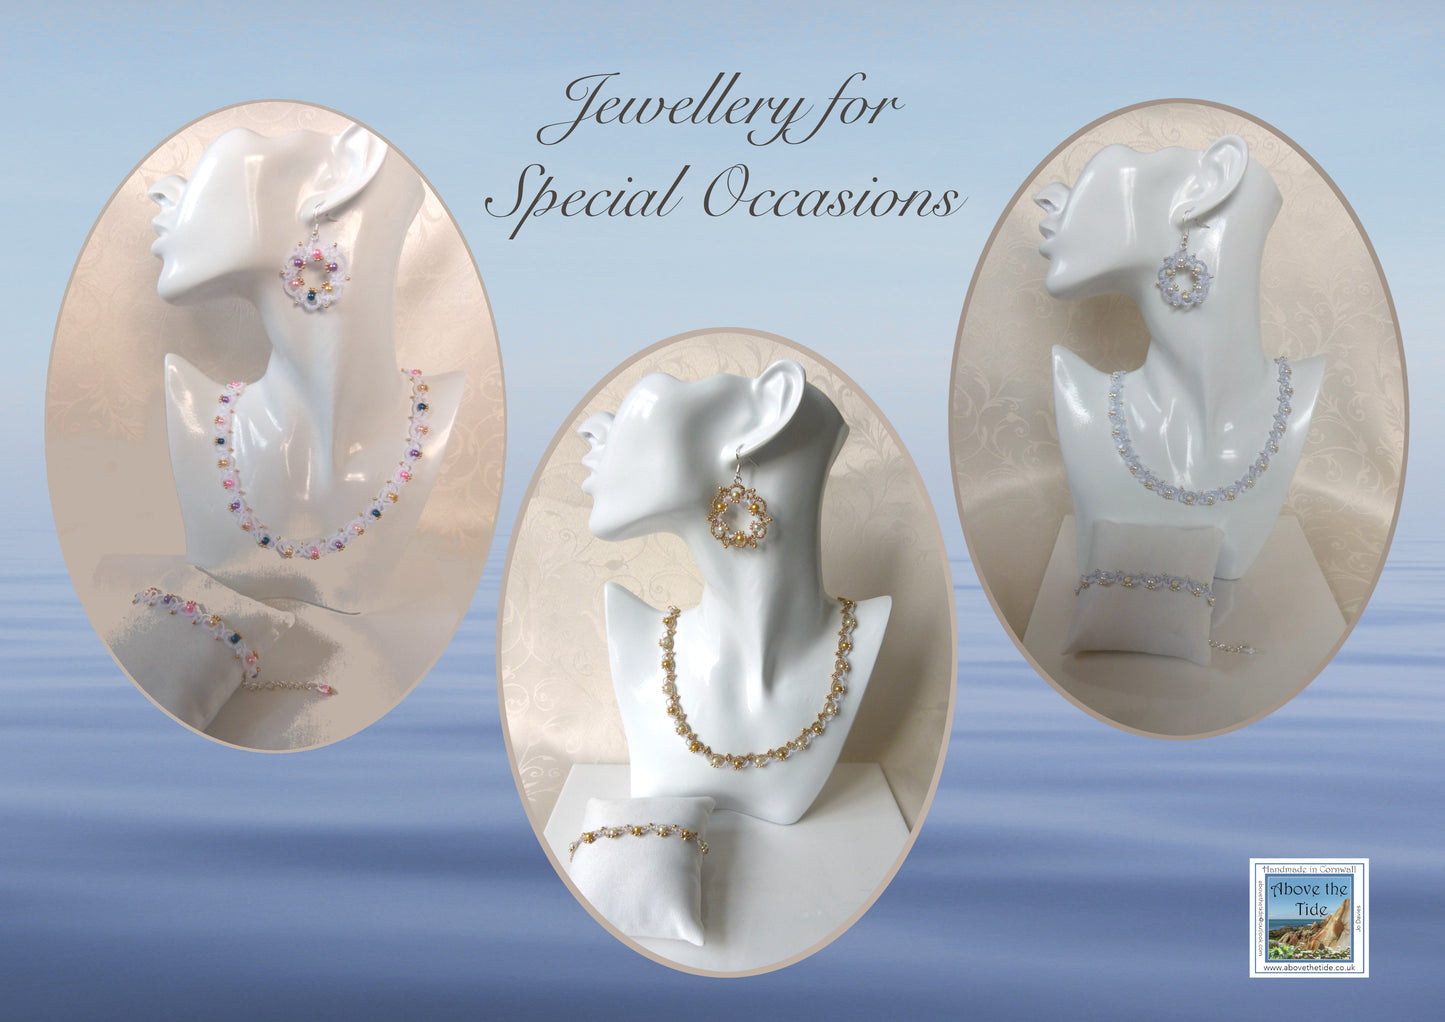 Jewellery for Special Occasions